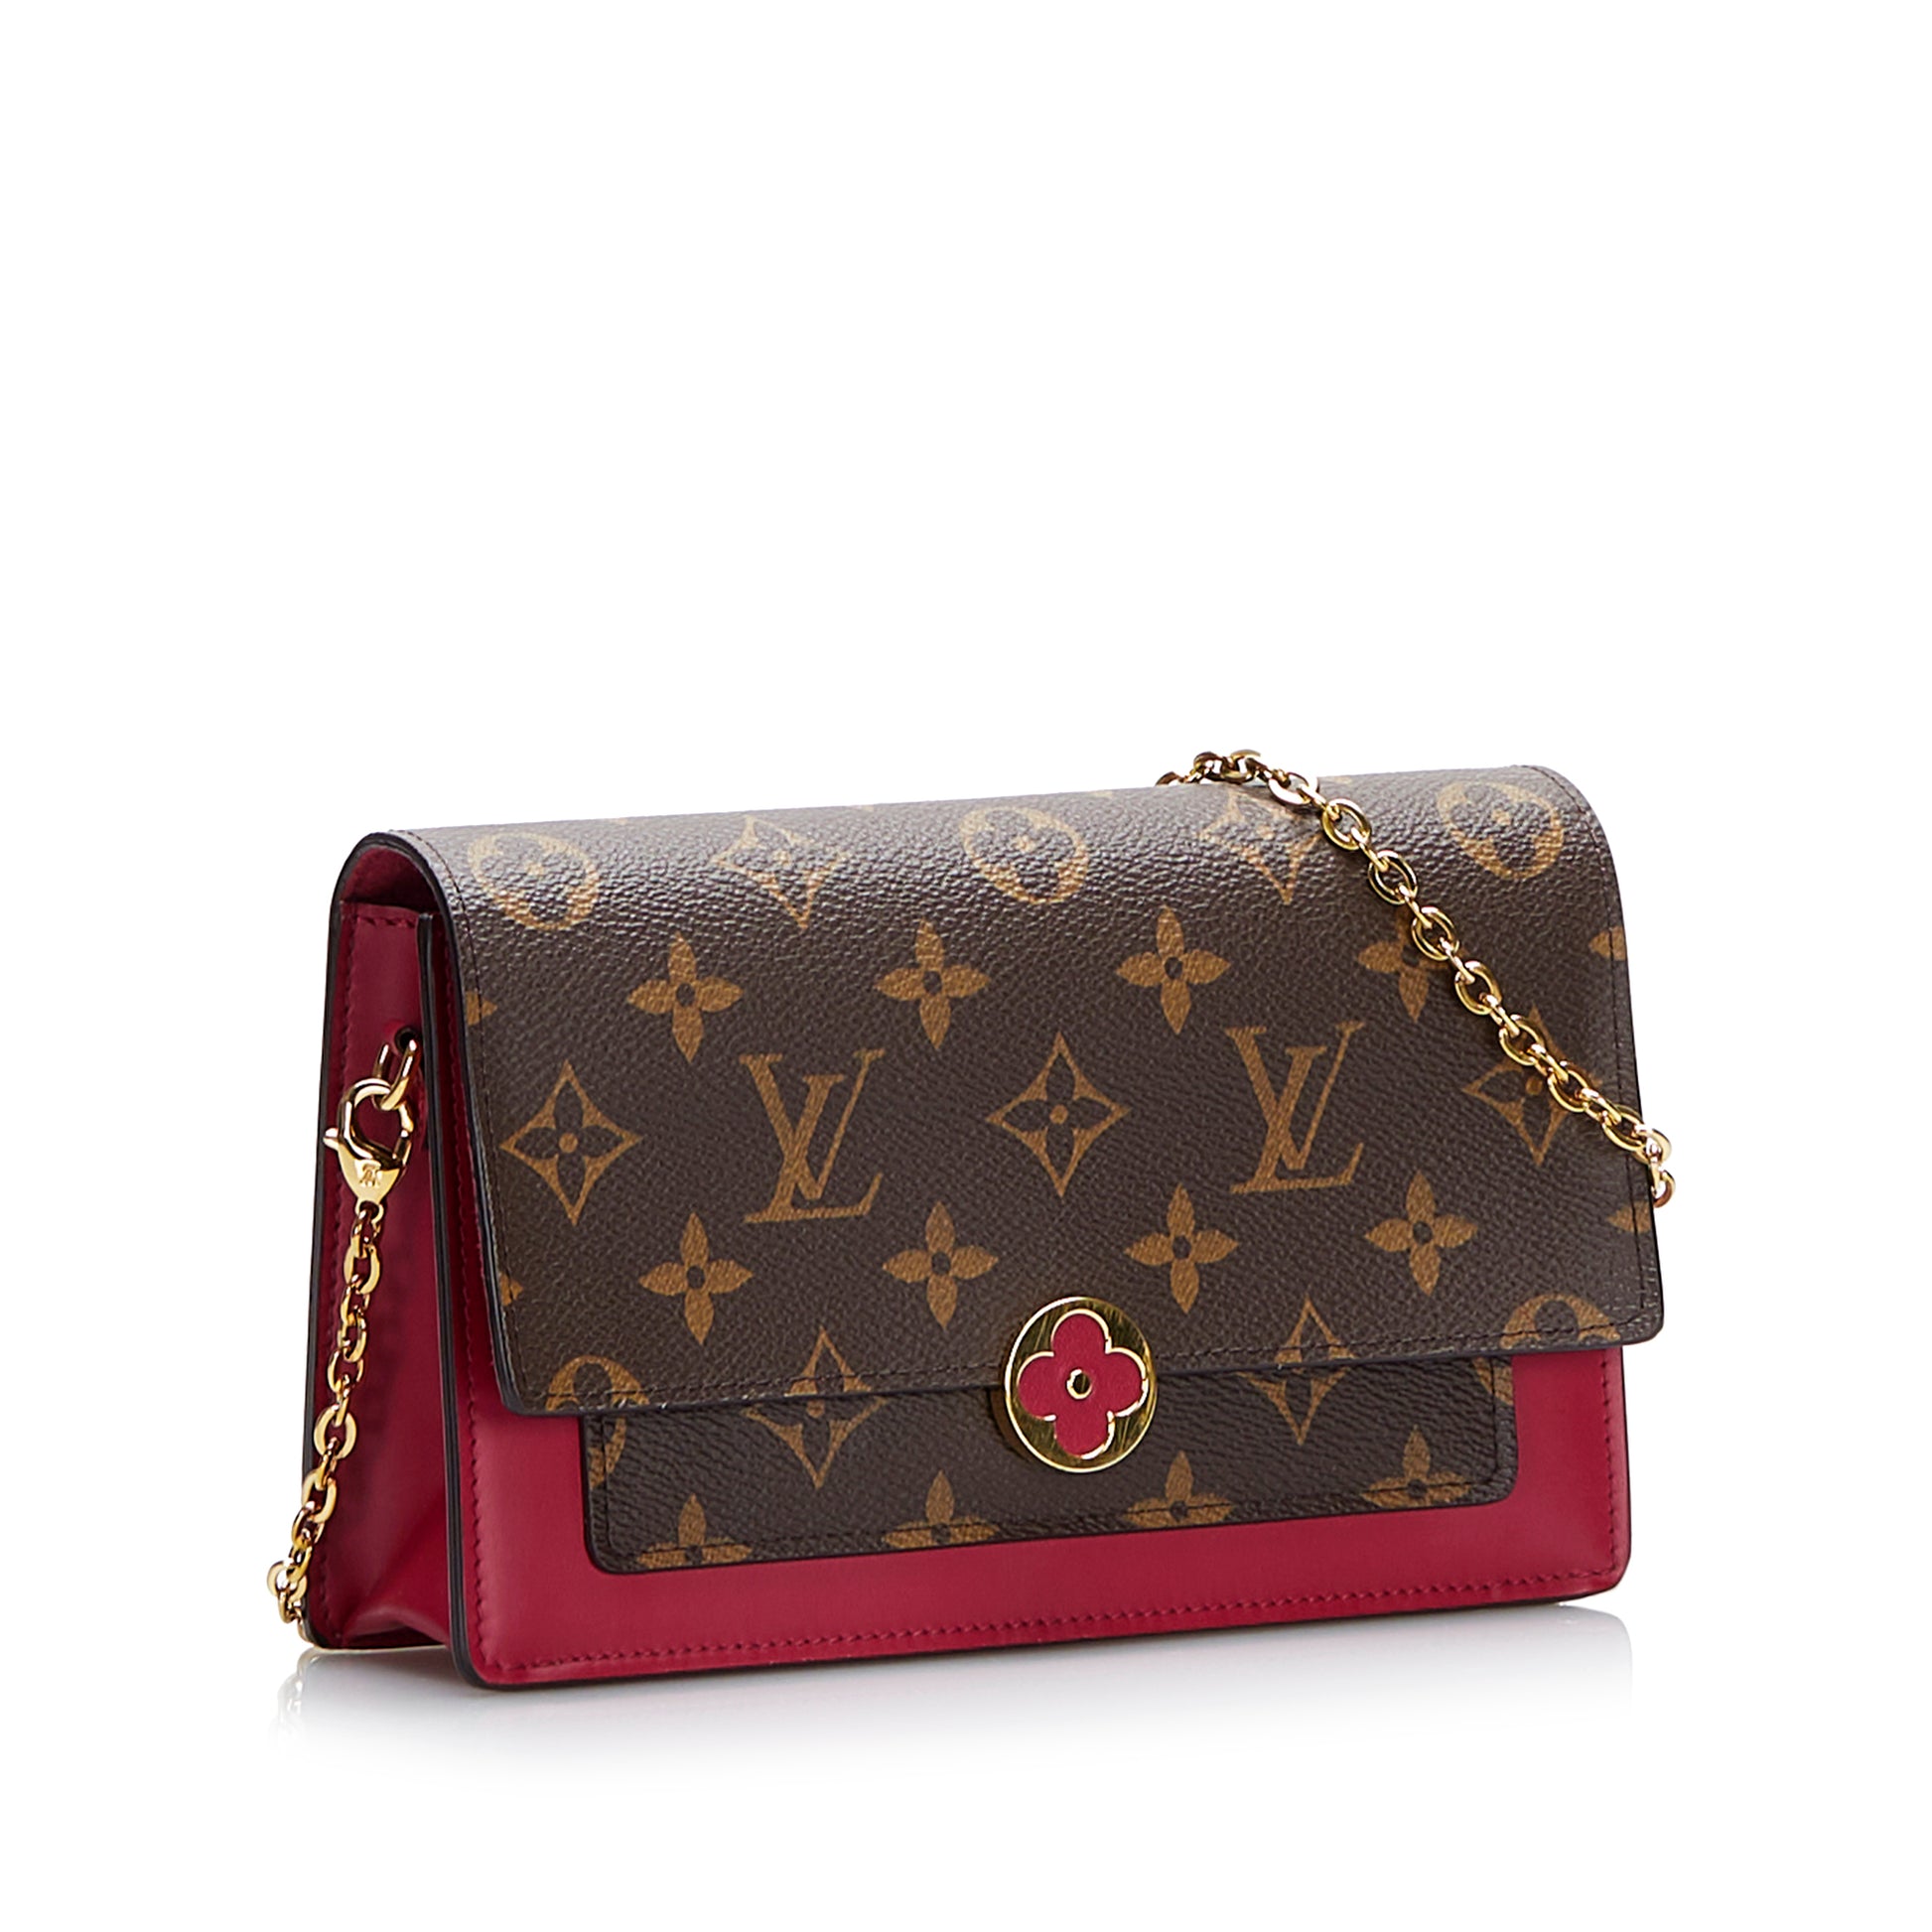 Authenticated Used LOUIS VUITTON Louis Vuitton 23 Cruise Neverfull